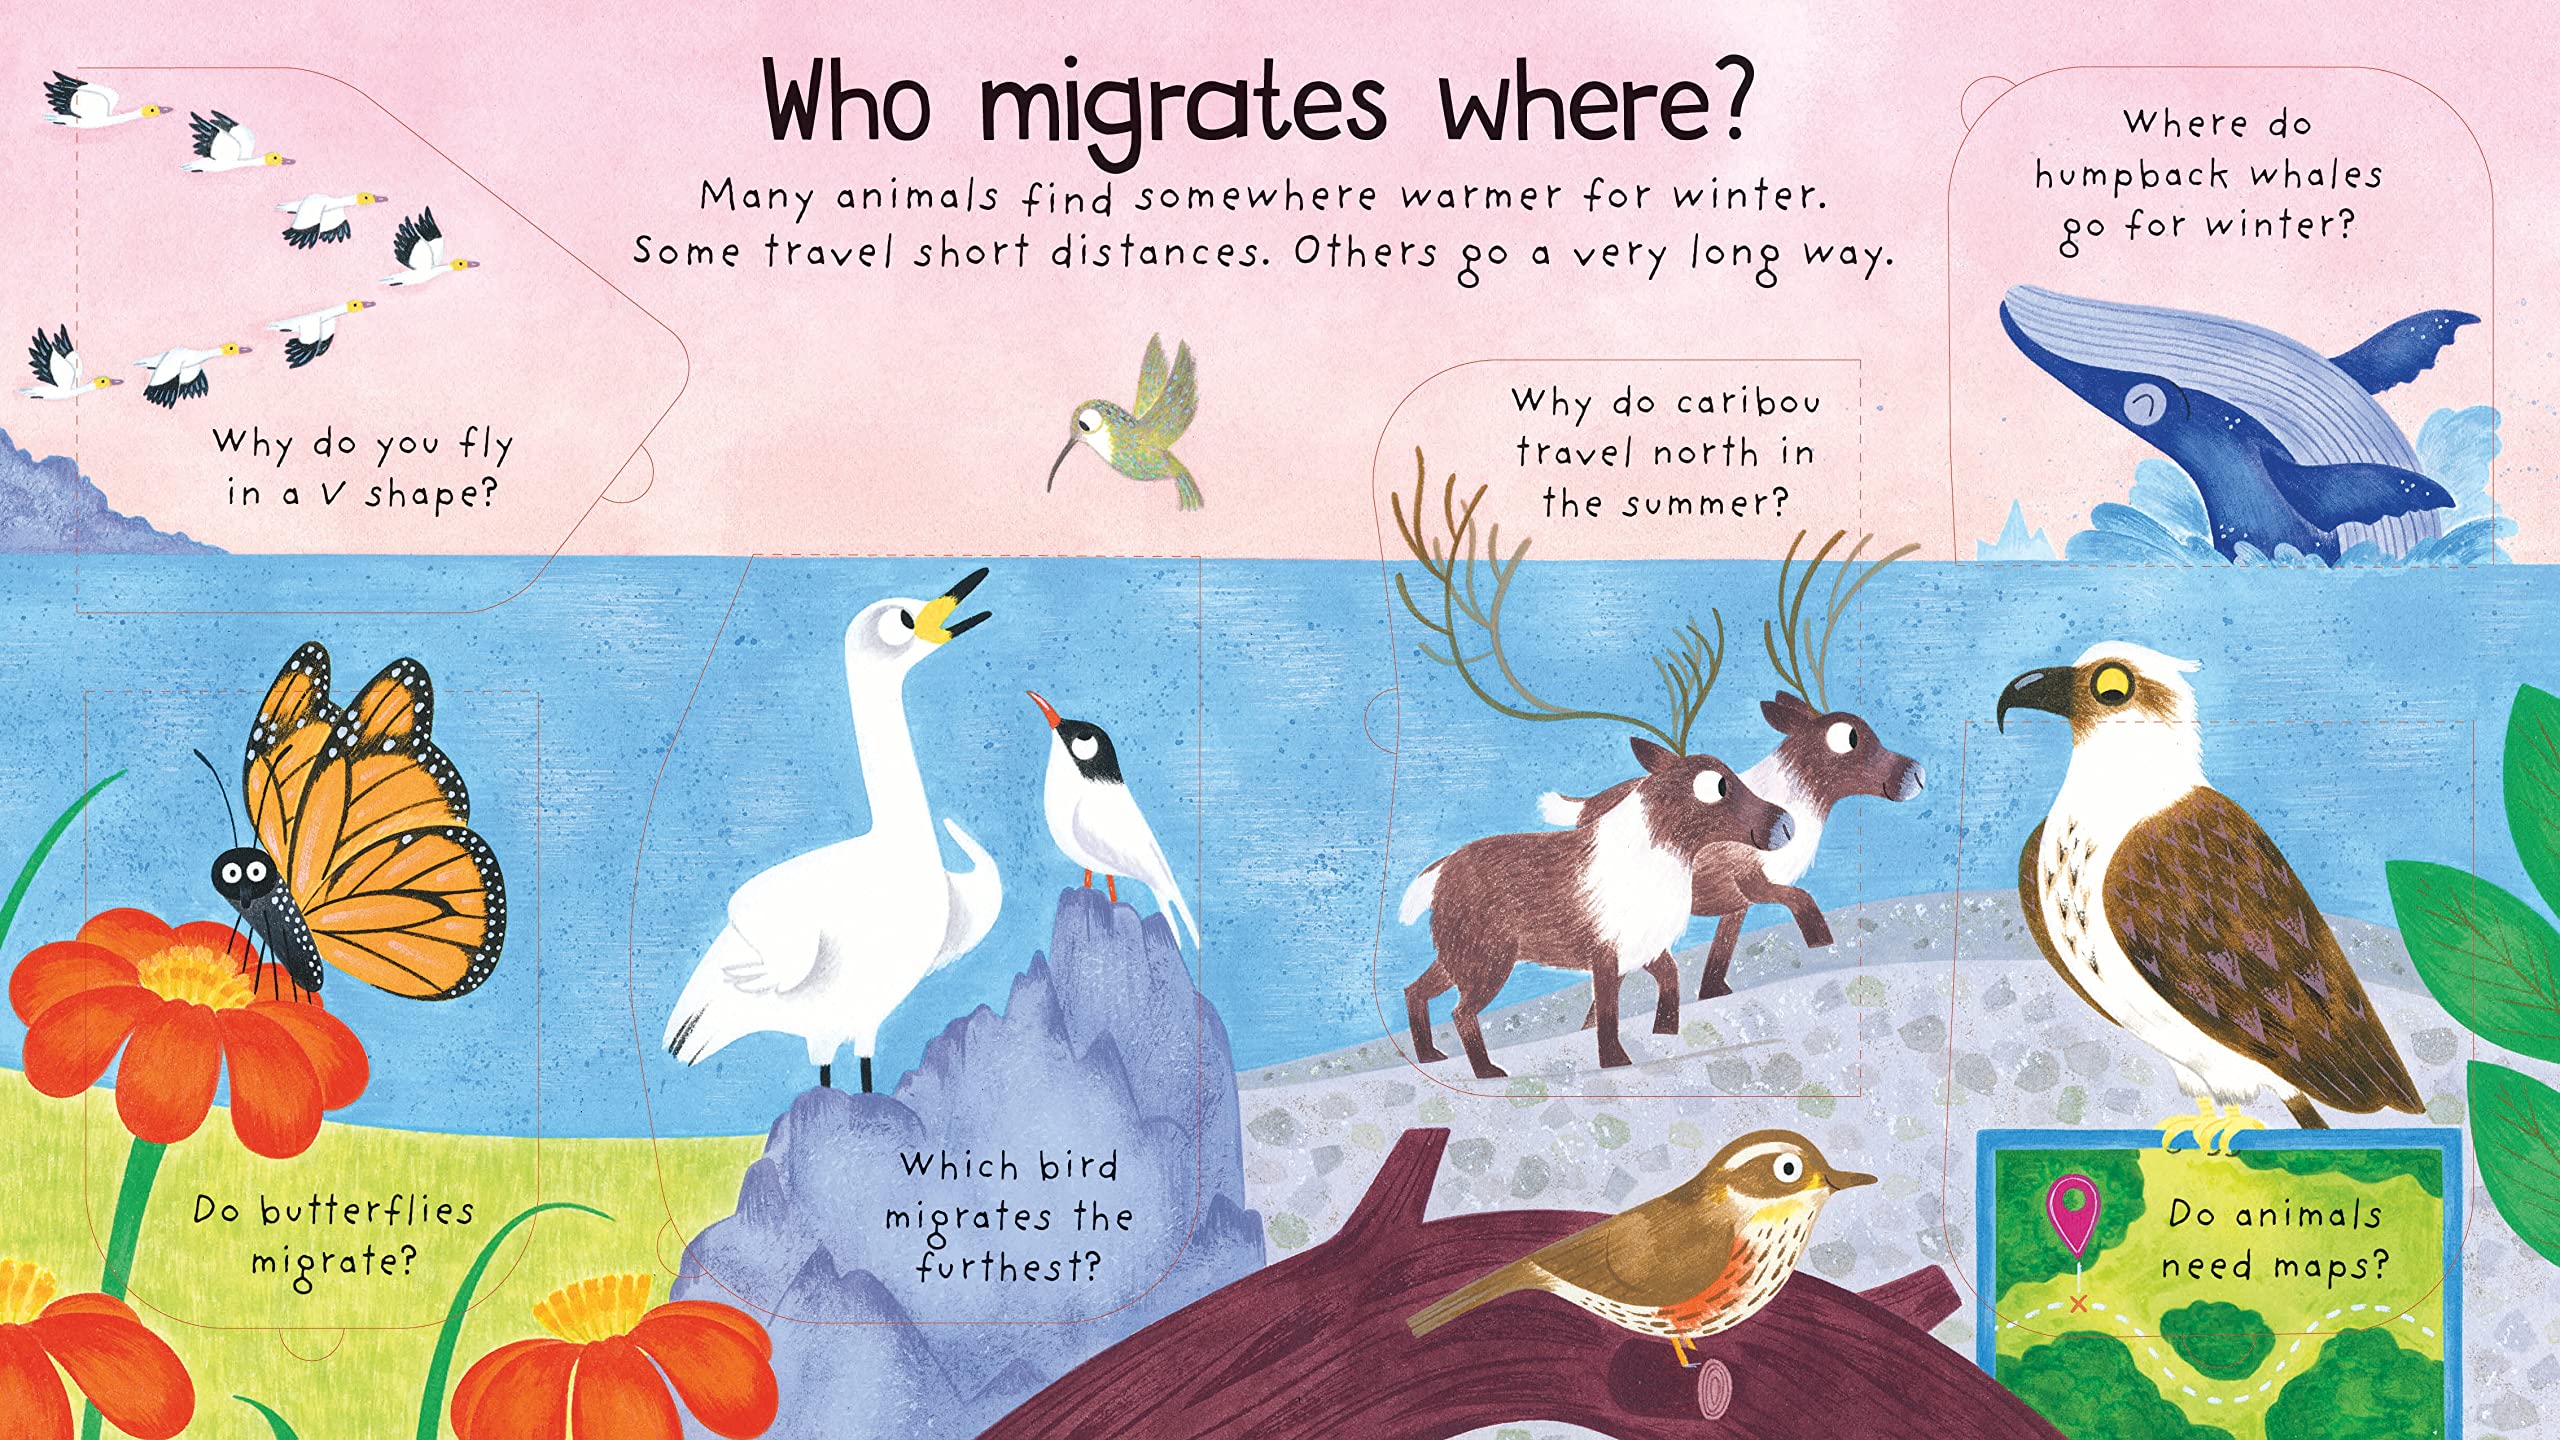 Lift-The-Flap First Questions And Answers : Where Do Animals Go in Winter?